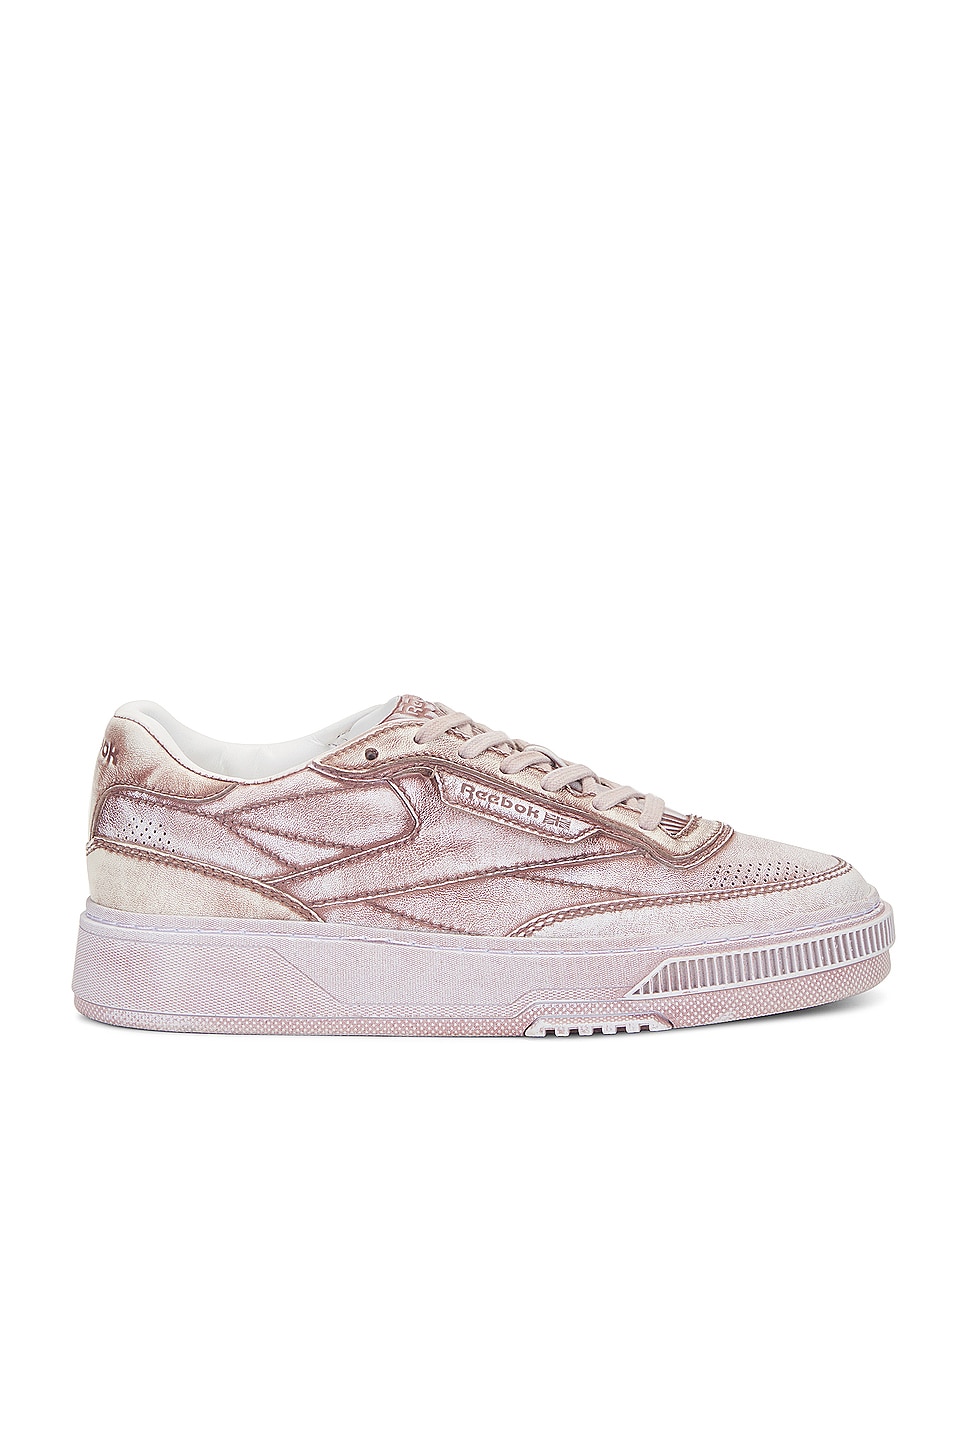 Image 1 of Reebok Club C Ltd Sneaker in Clay Overdyed